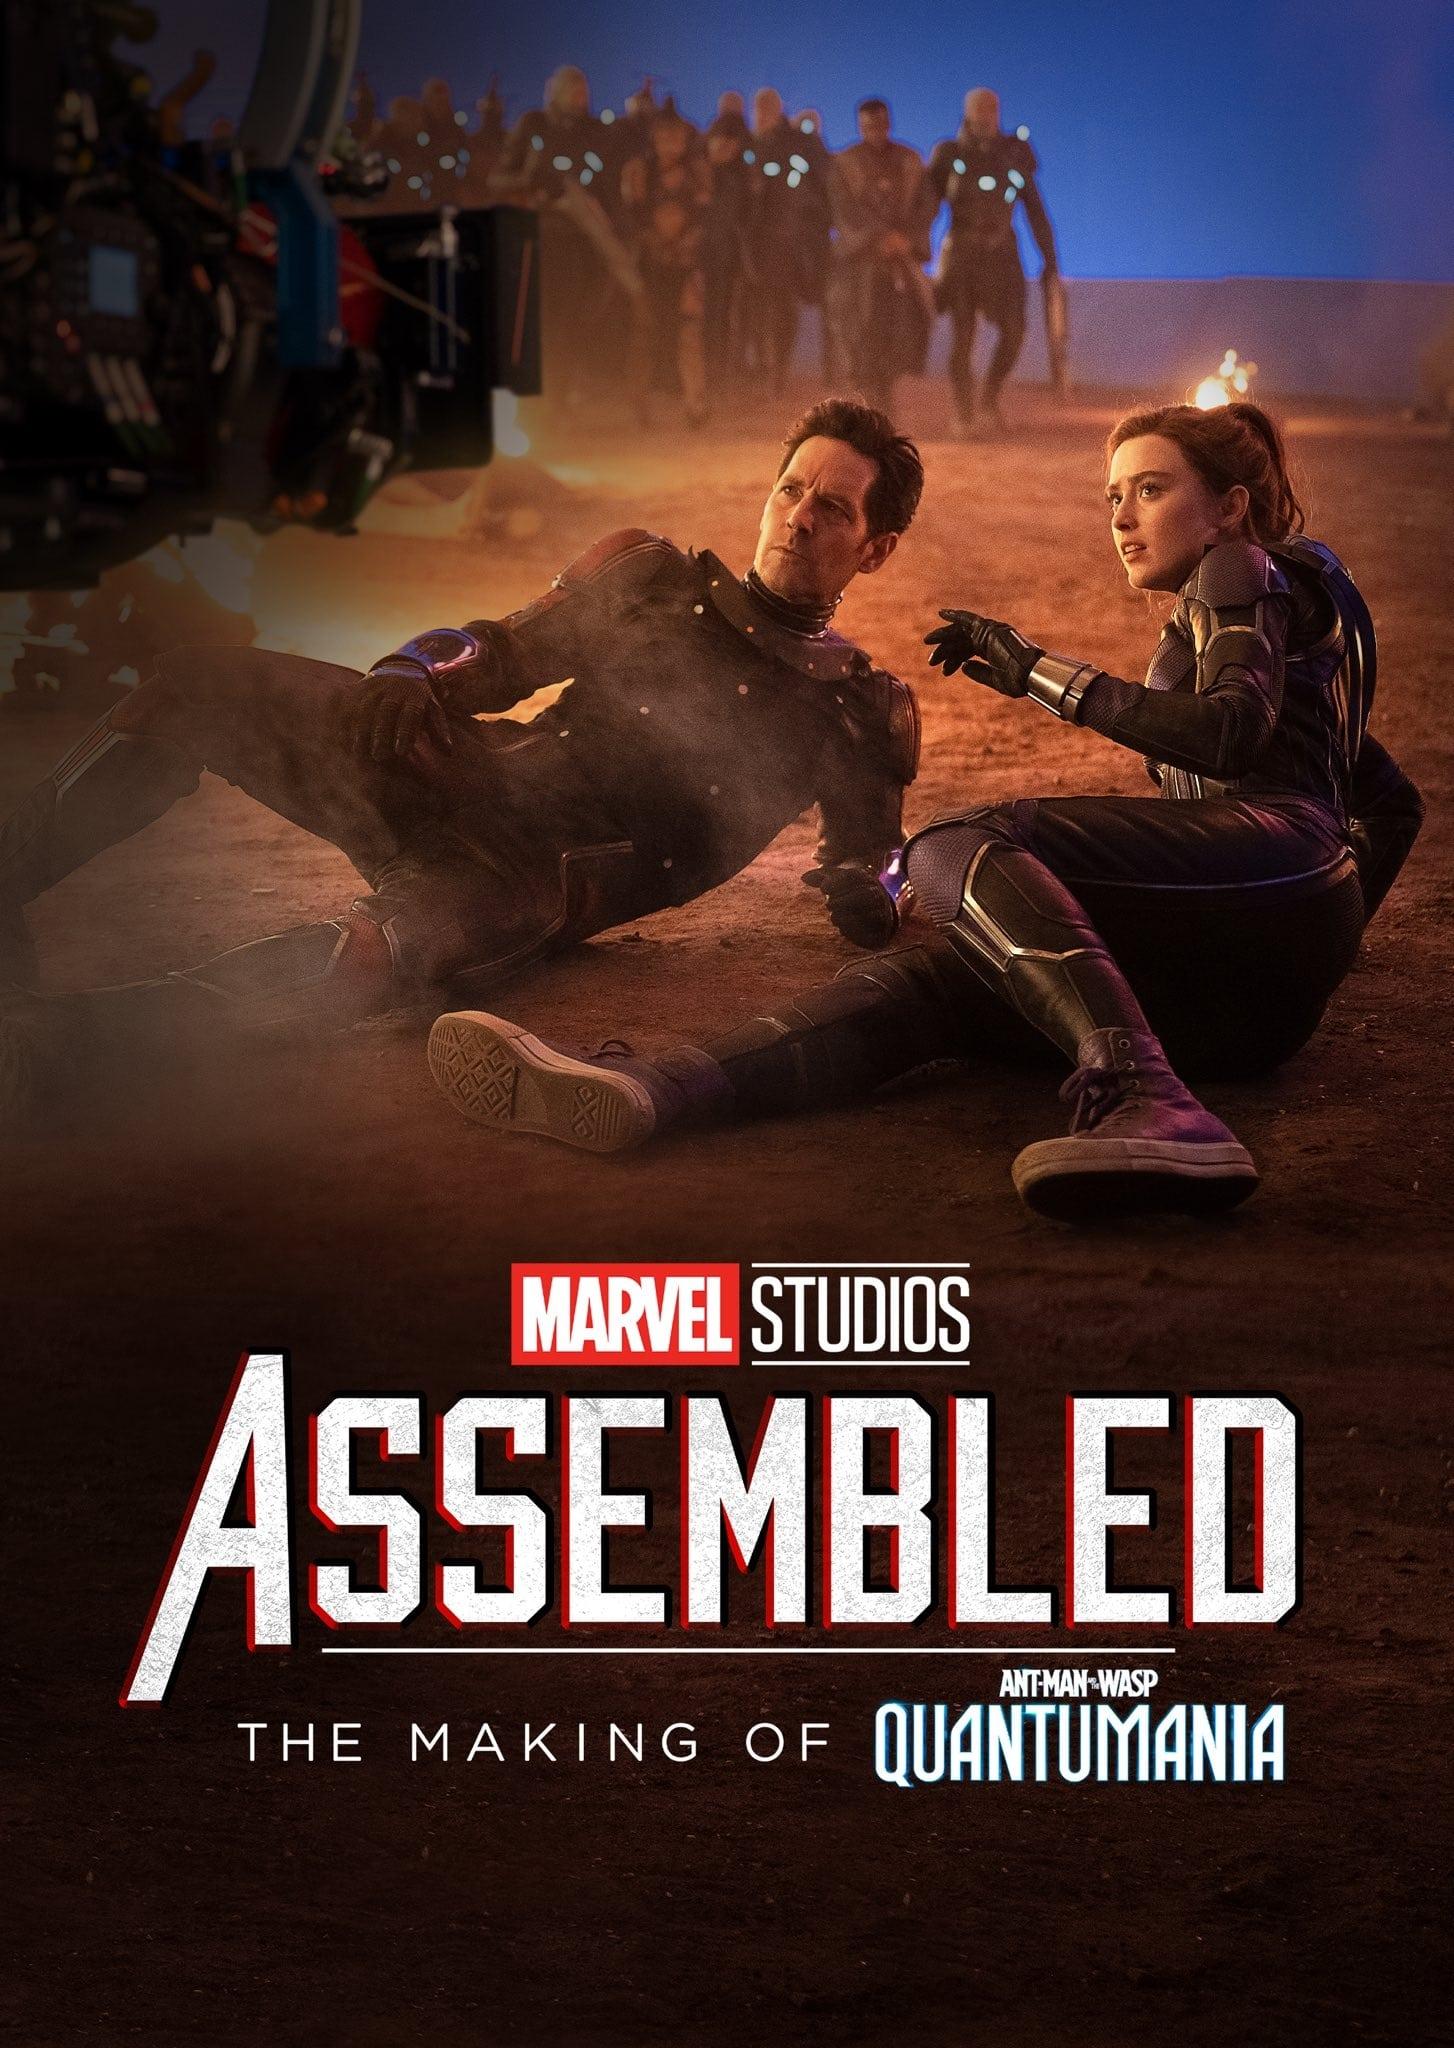 Marvel Studios Assembled: The Making of Ant-Man and the Wasp: Quantumania poster